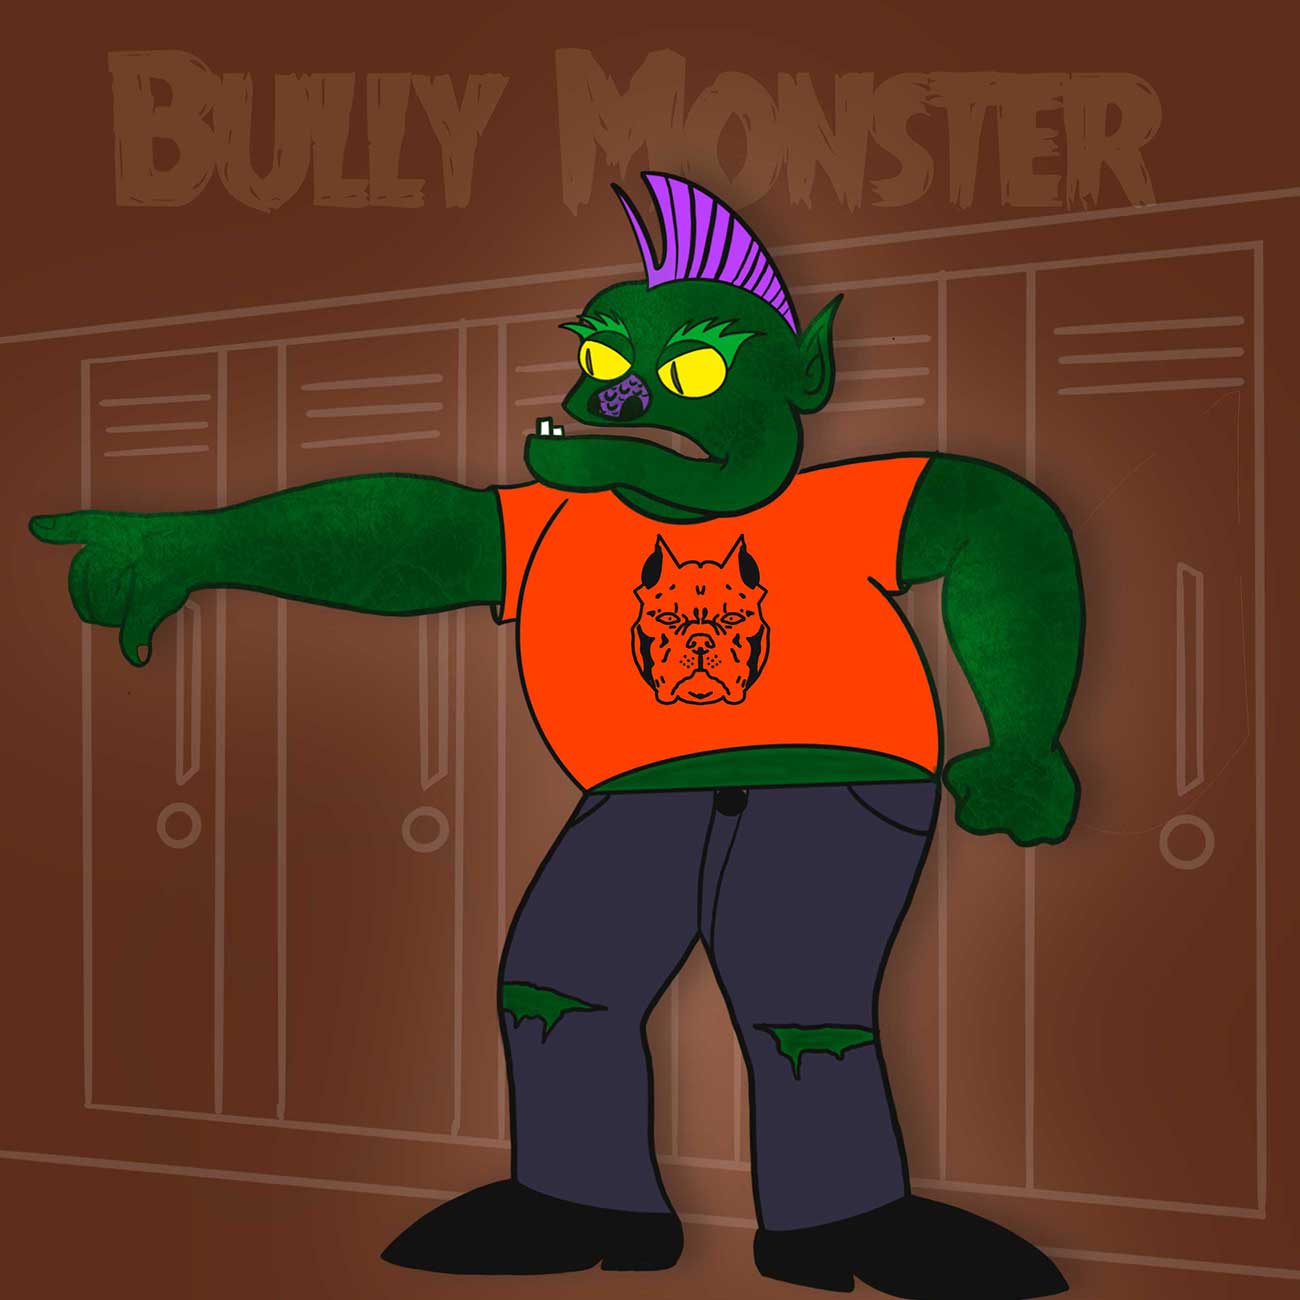 Bullies are Scary